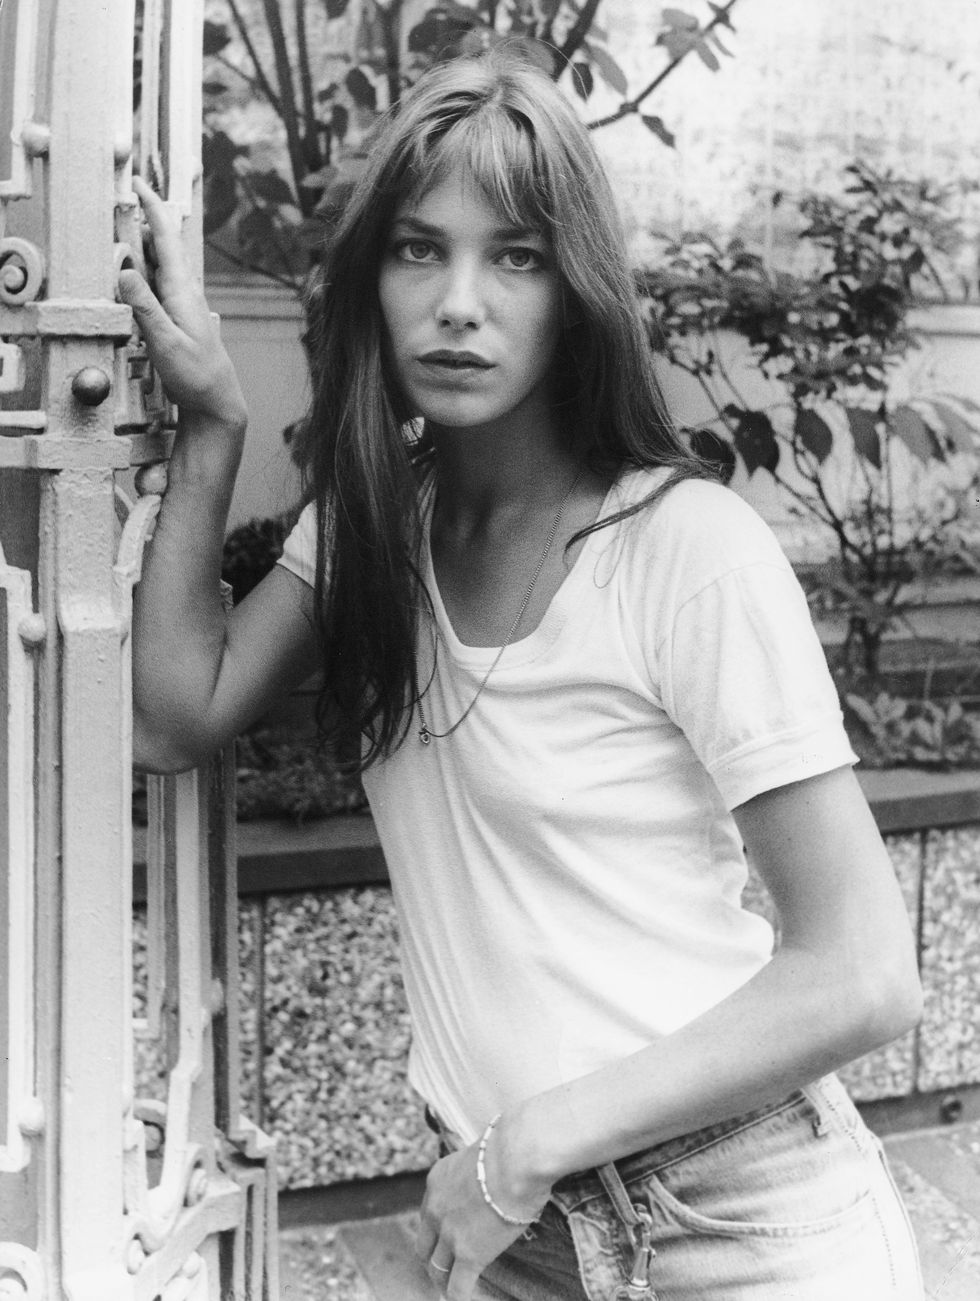 Where To Buy That Jane Birkin-Style Basket Bag Everyone's Been Carrying